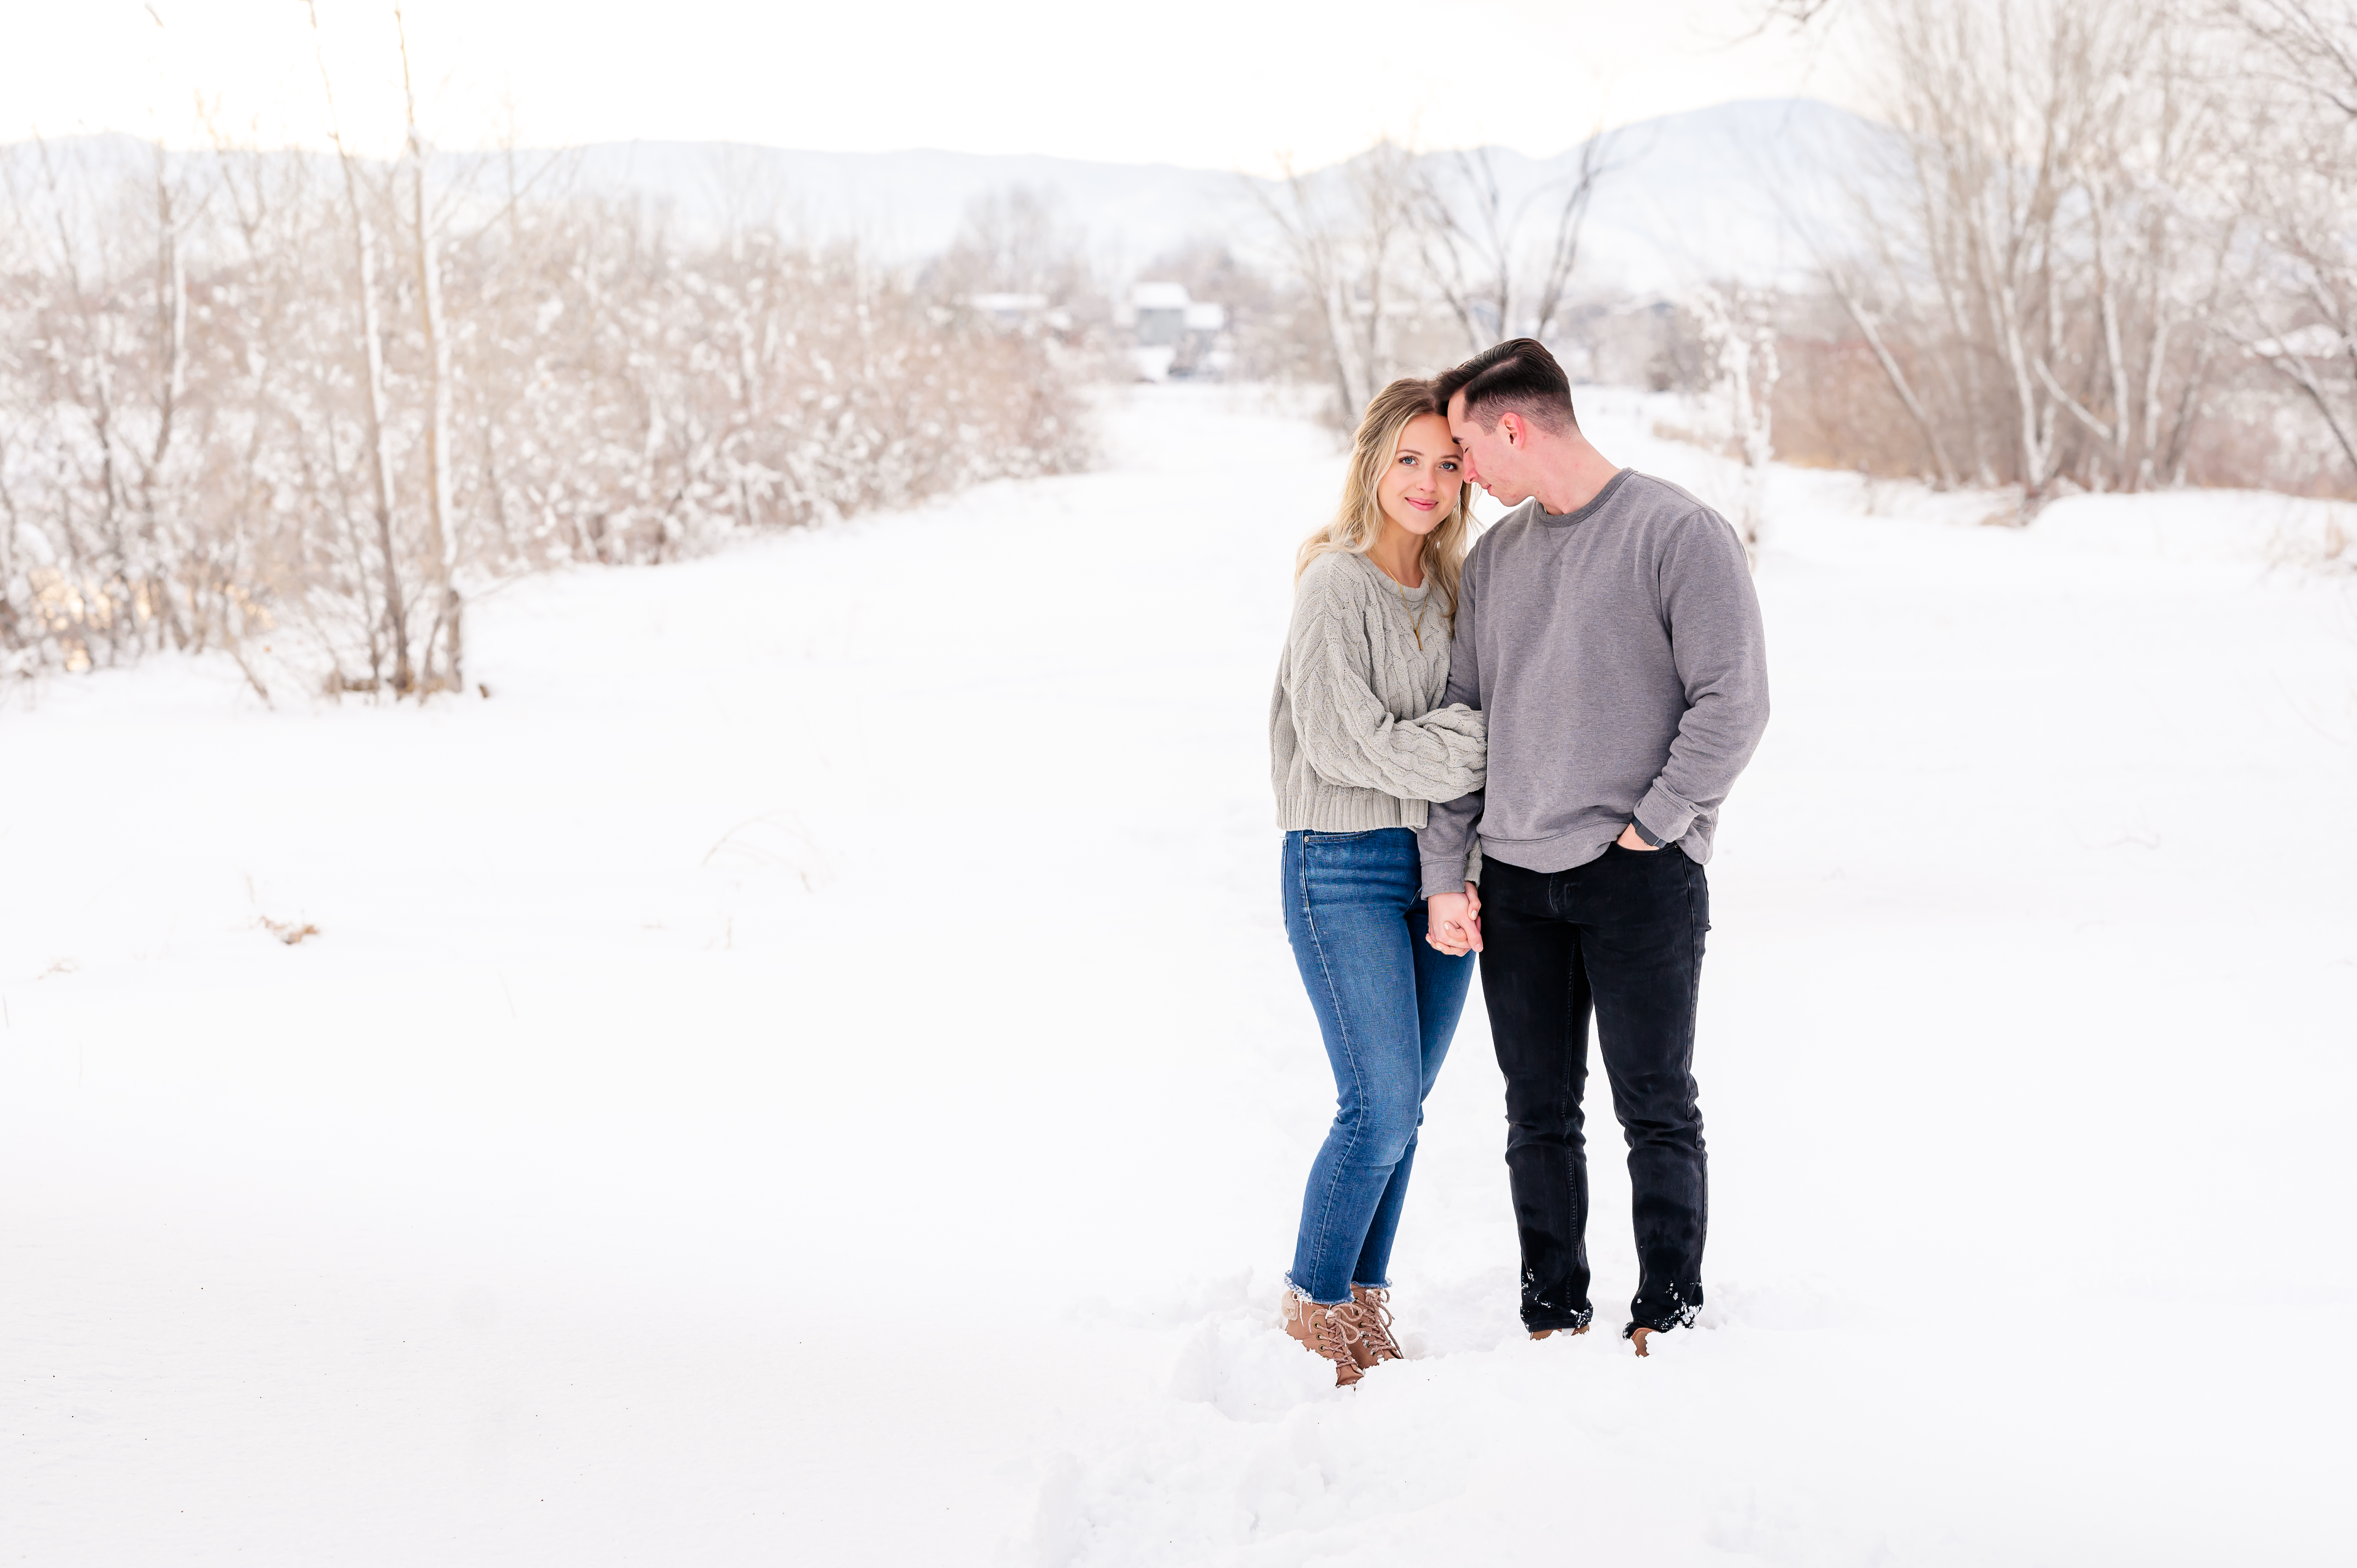 Winter Engagement at Sunset in Loveland Colorado | Britni Girard Photography | Colorado Wedding Photography and Wedding Films